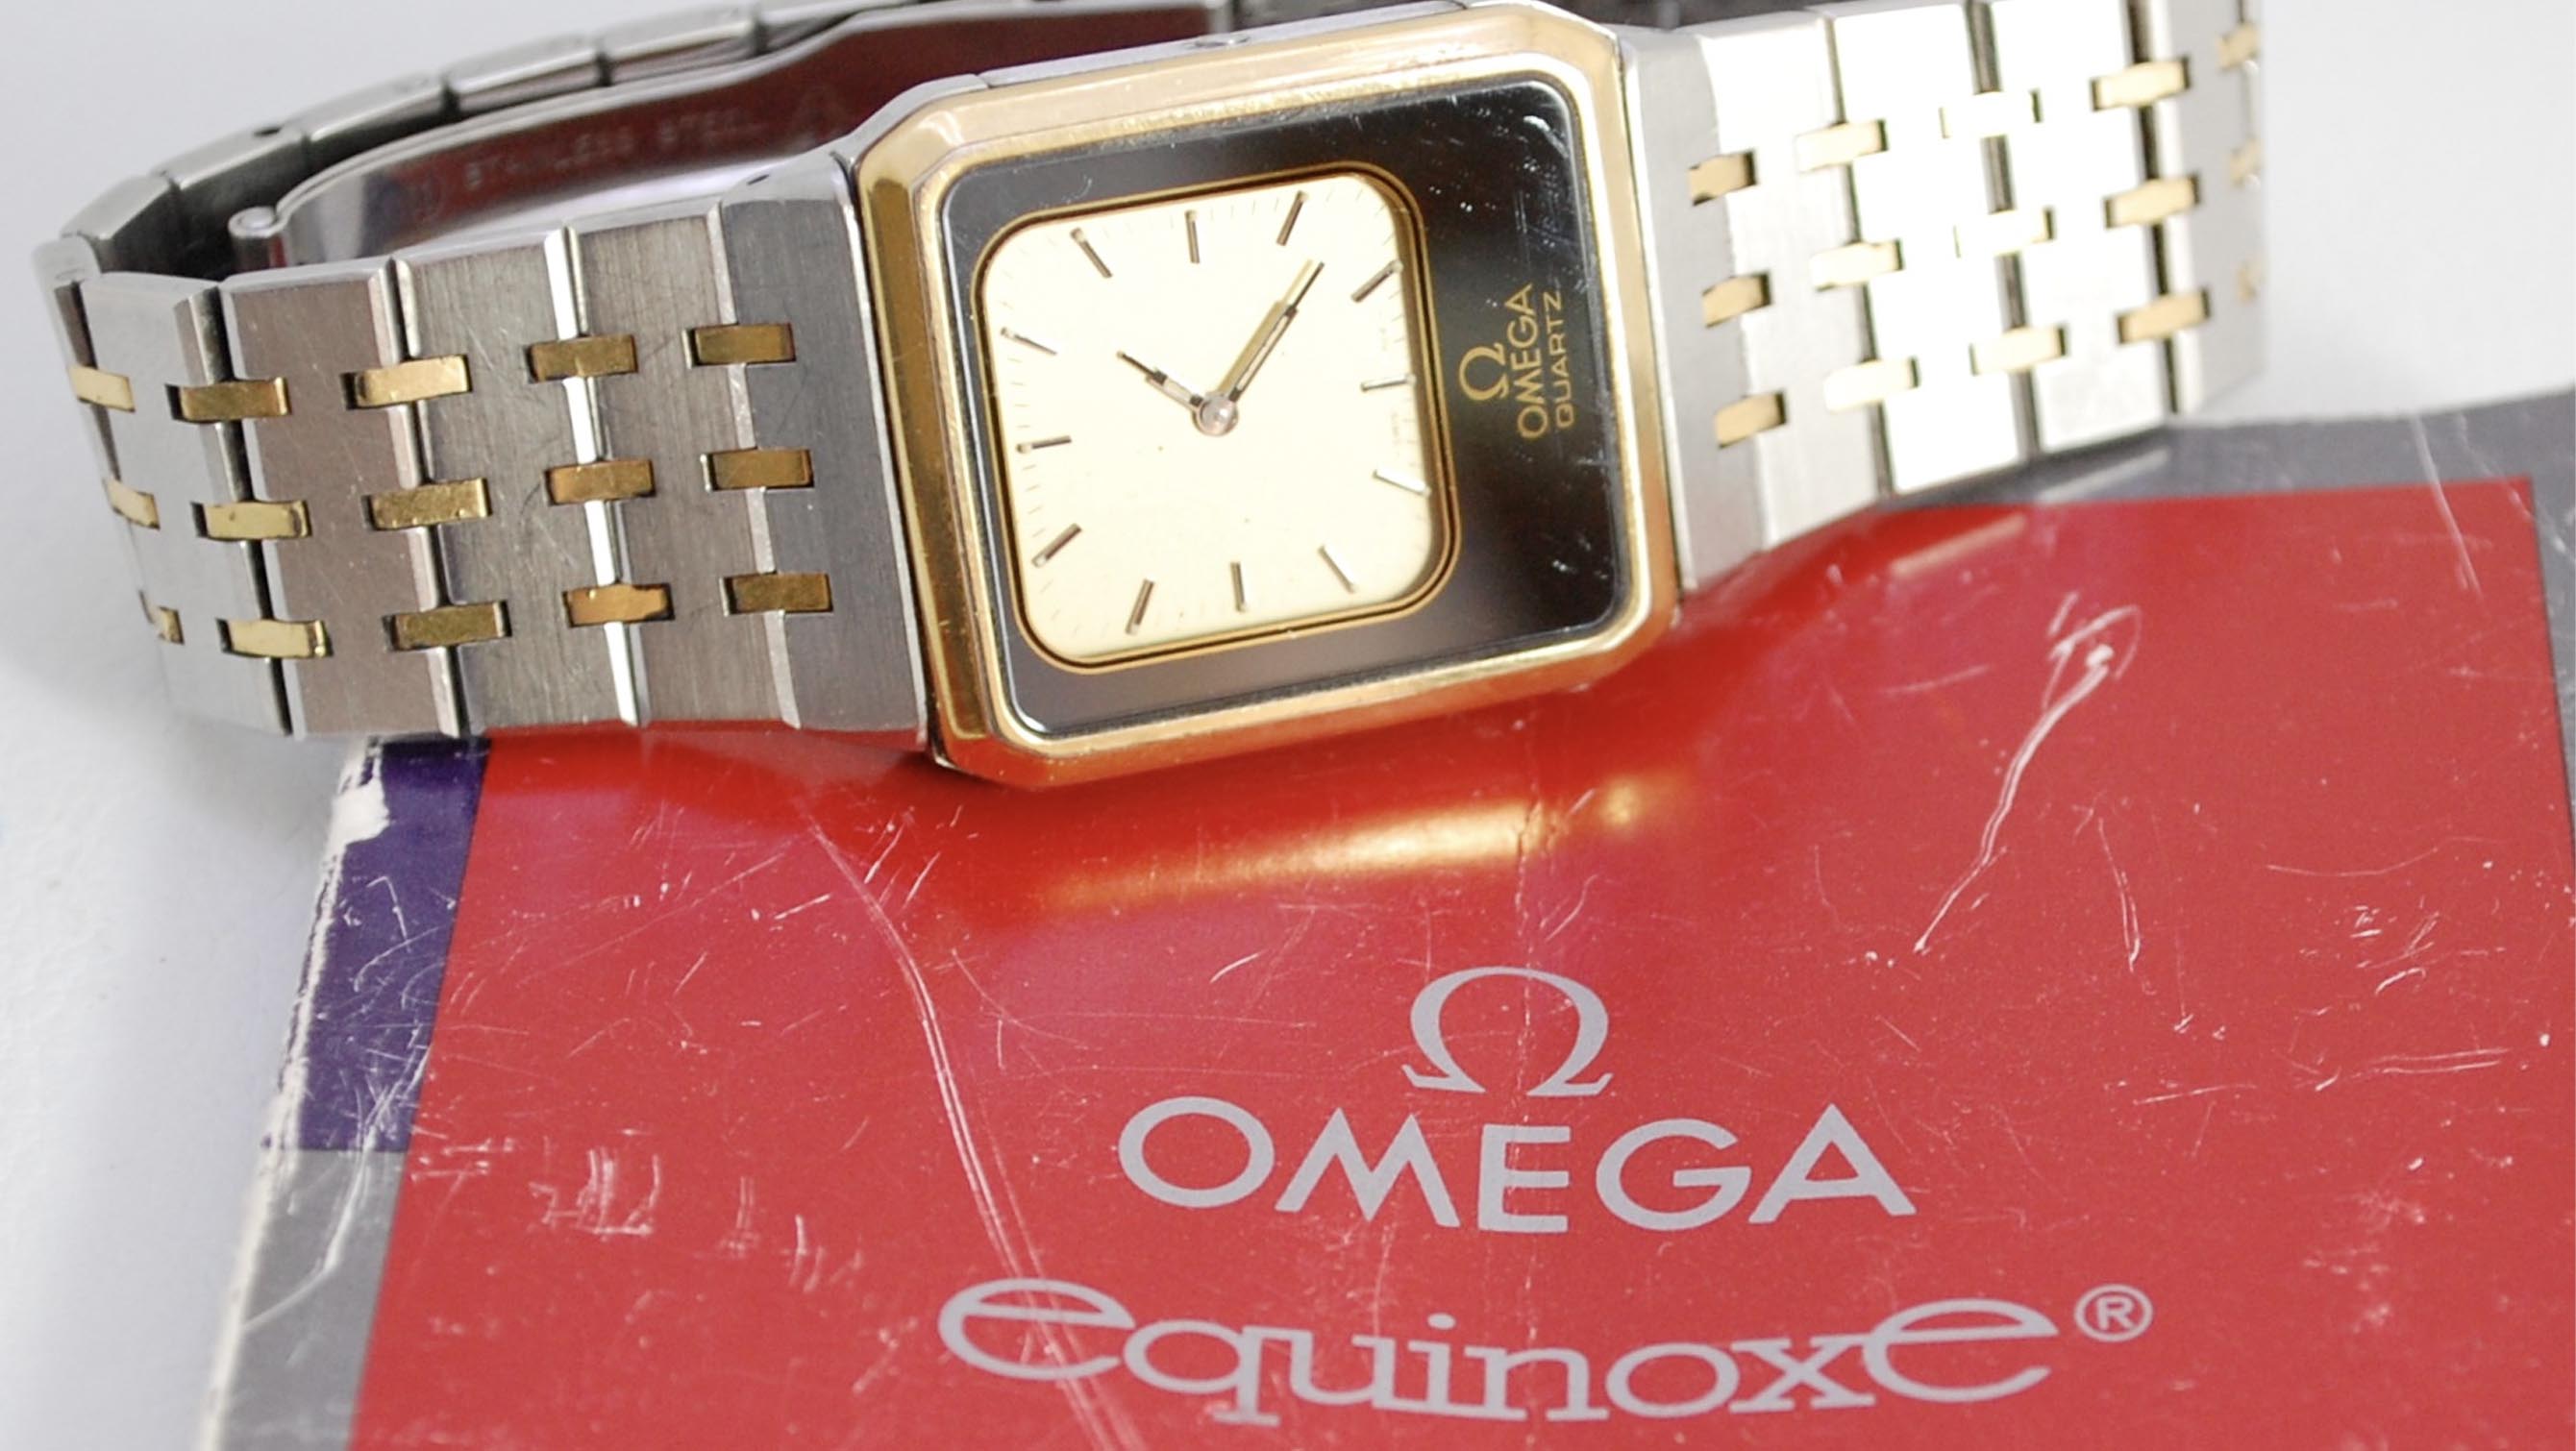 The first double-faced watch wasn’t made by the brand you expect